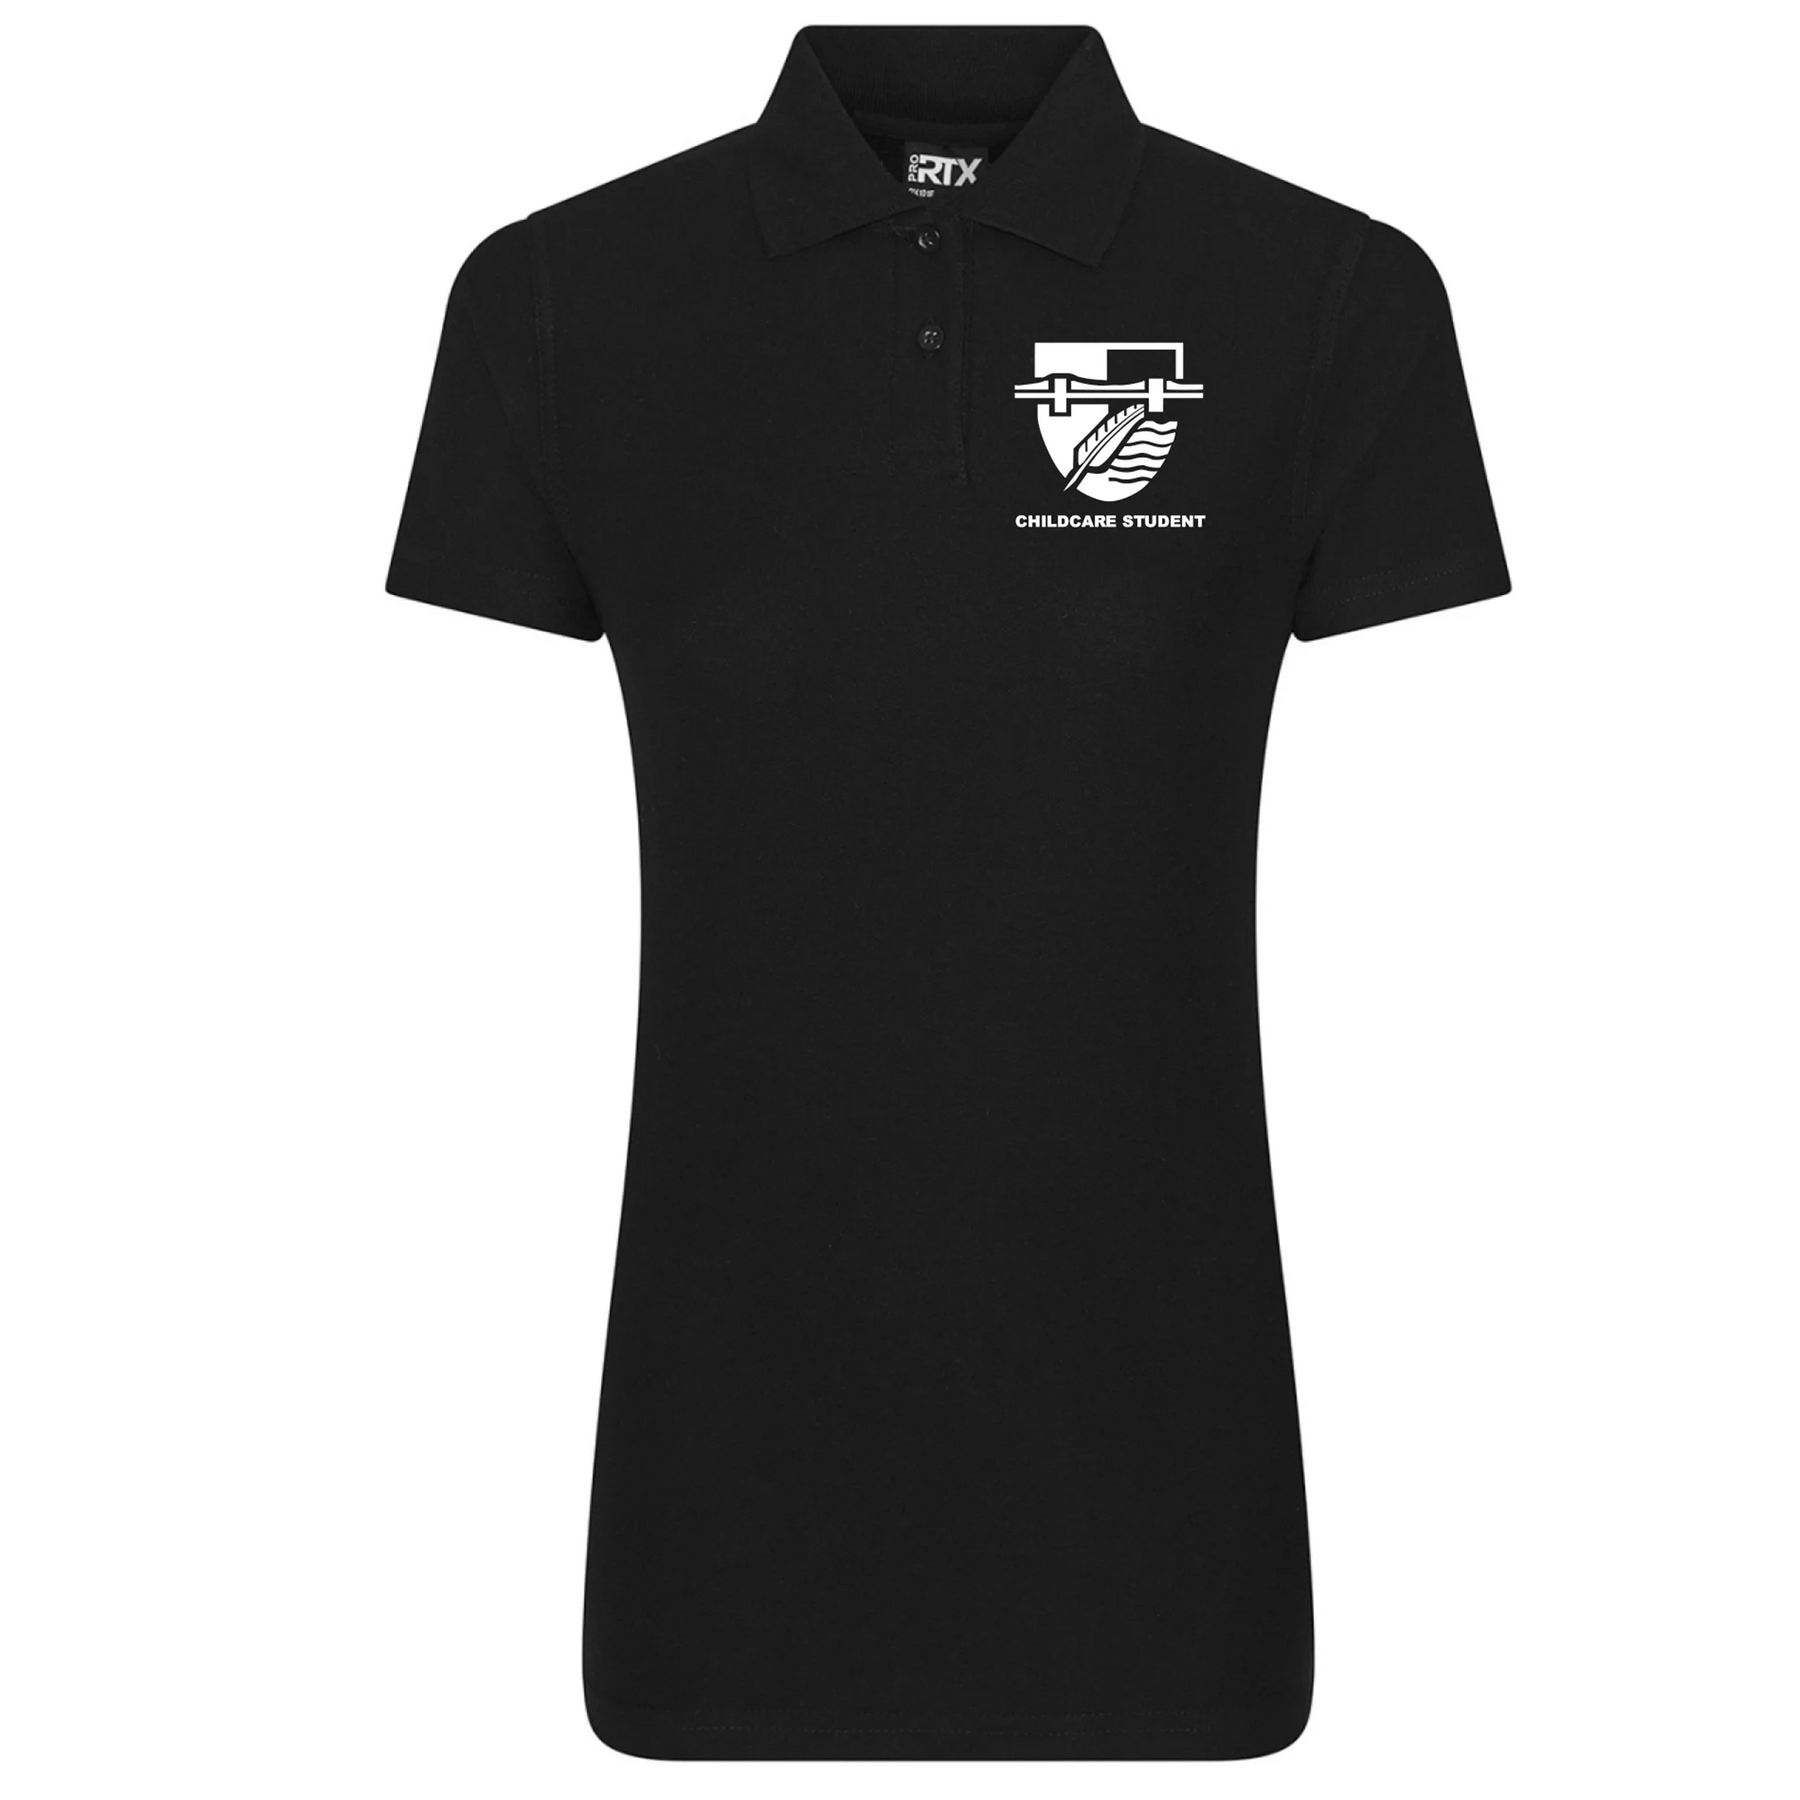 Great Marlow School Childcare Polo: Black